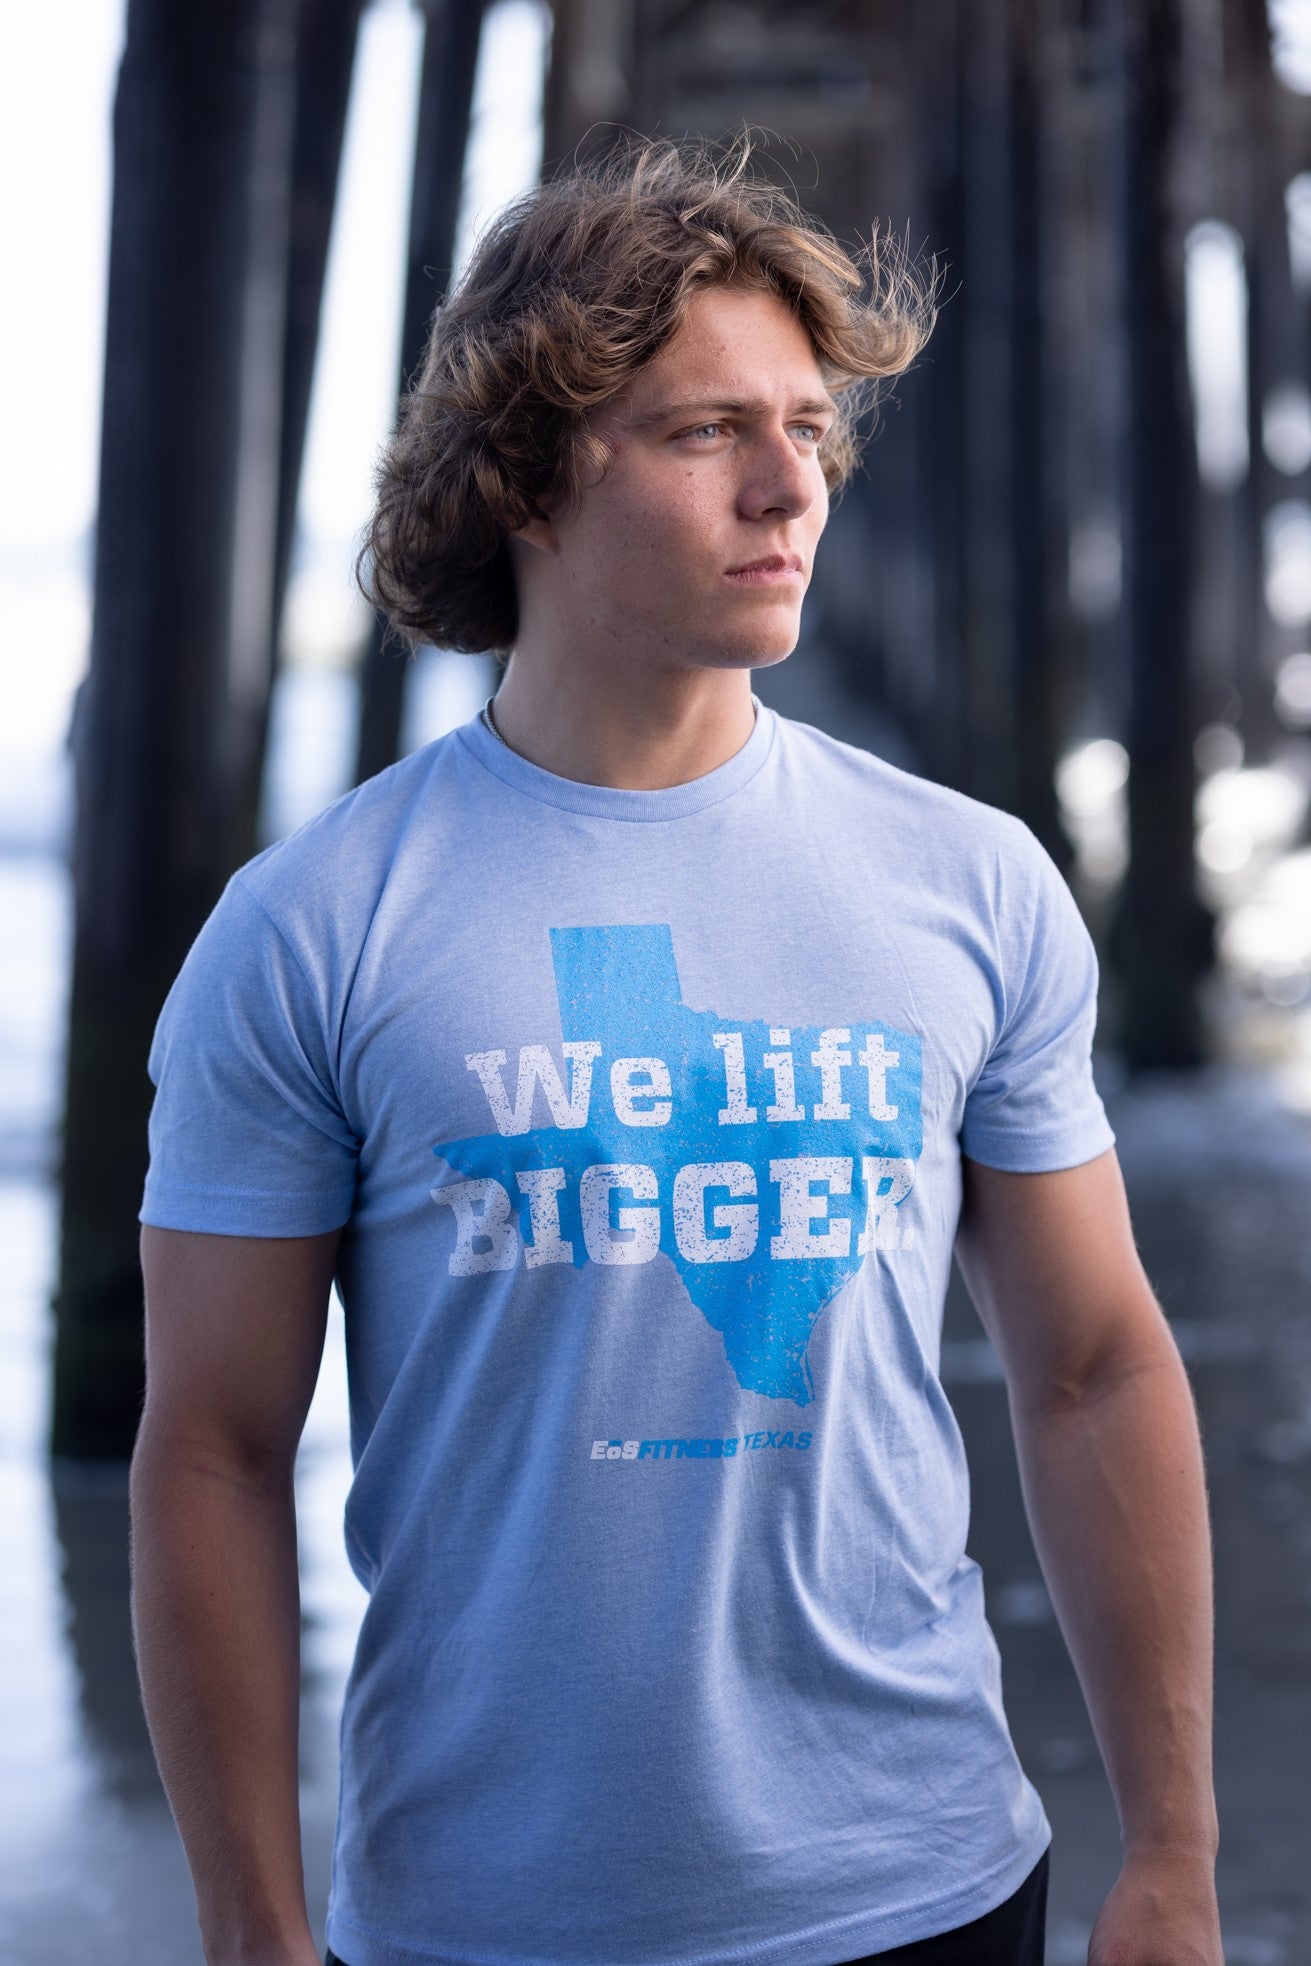 Texas Lift Bigger Next Level Fitted Crew | Columbia Blue